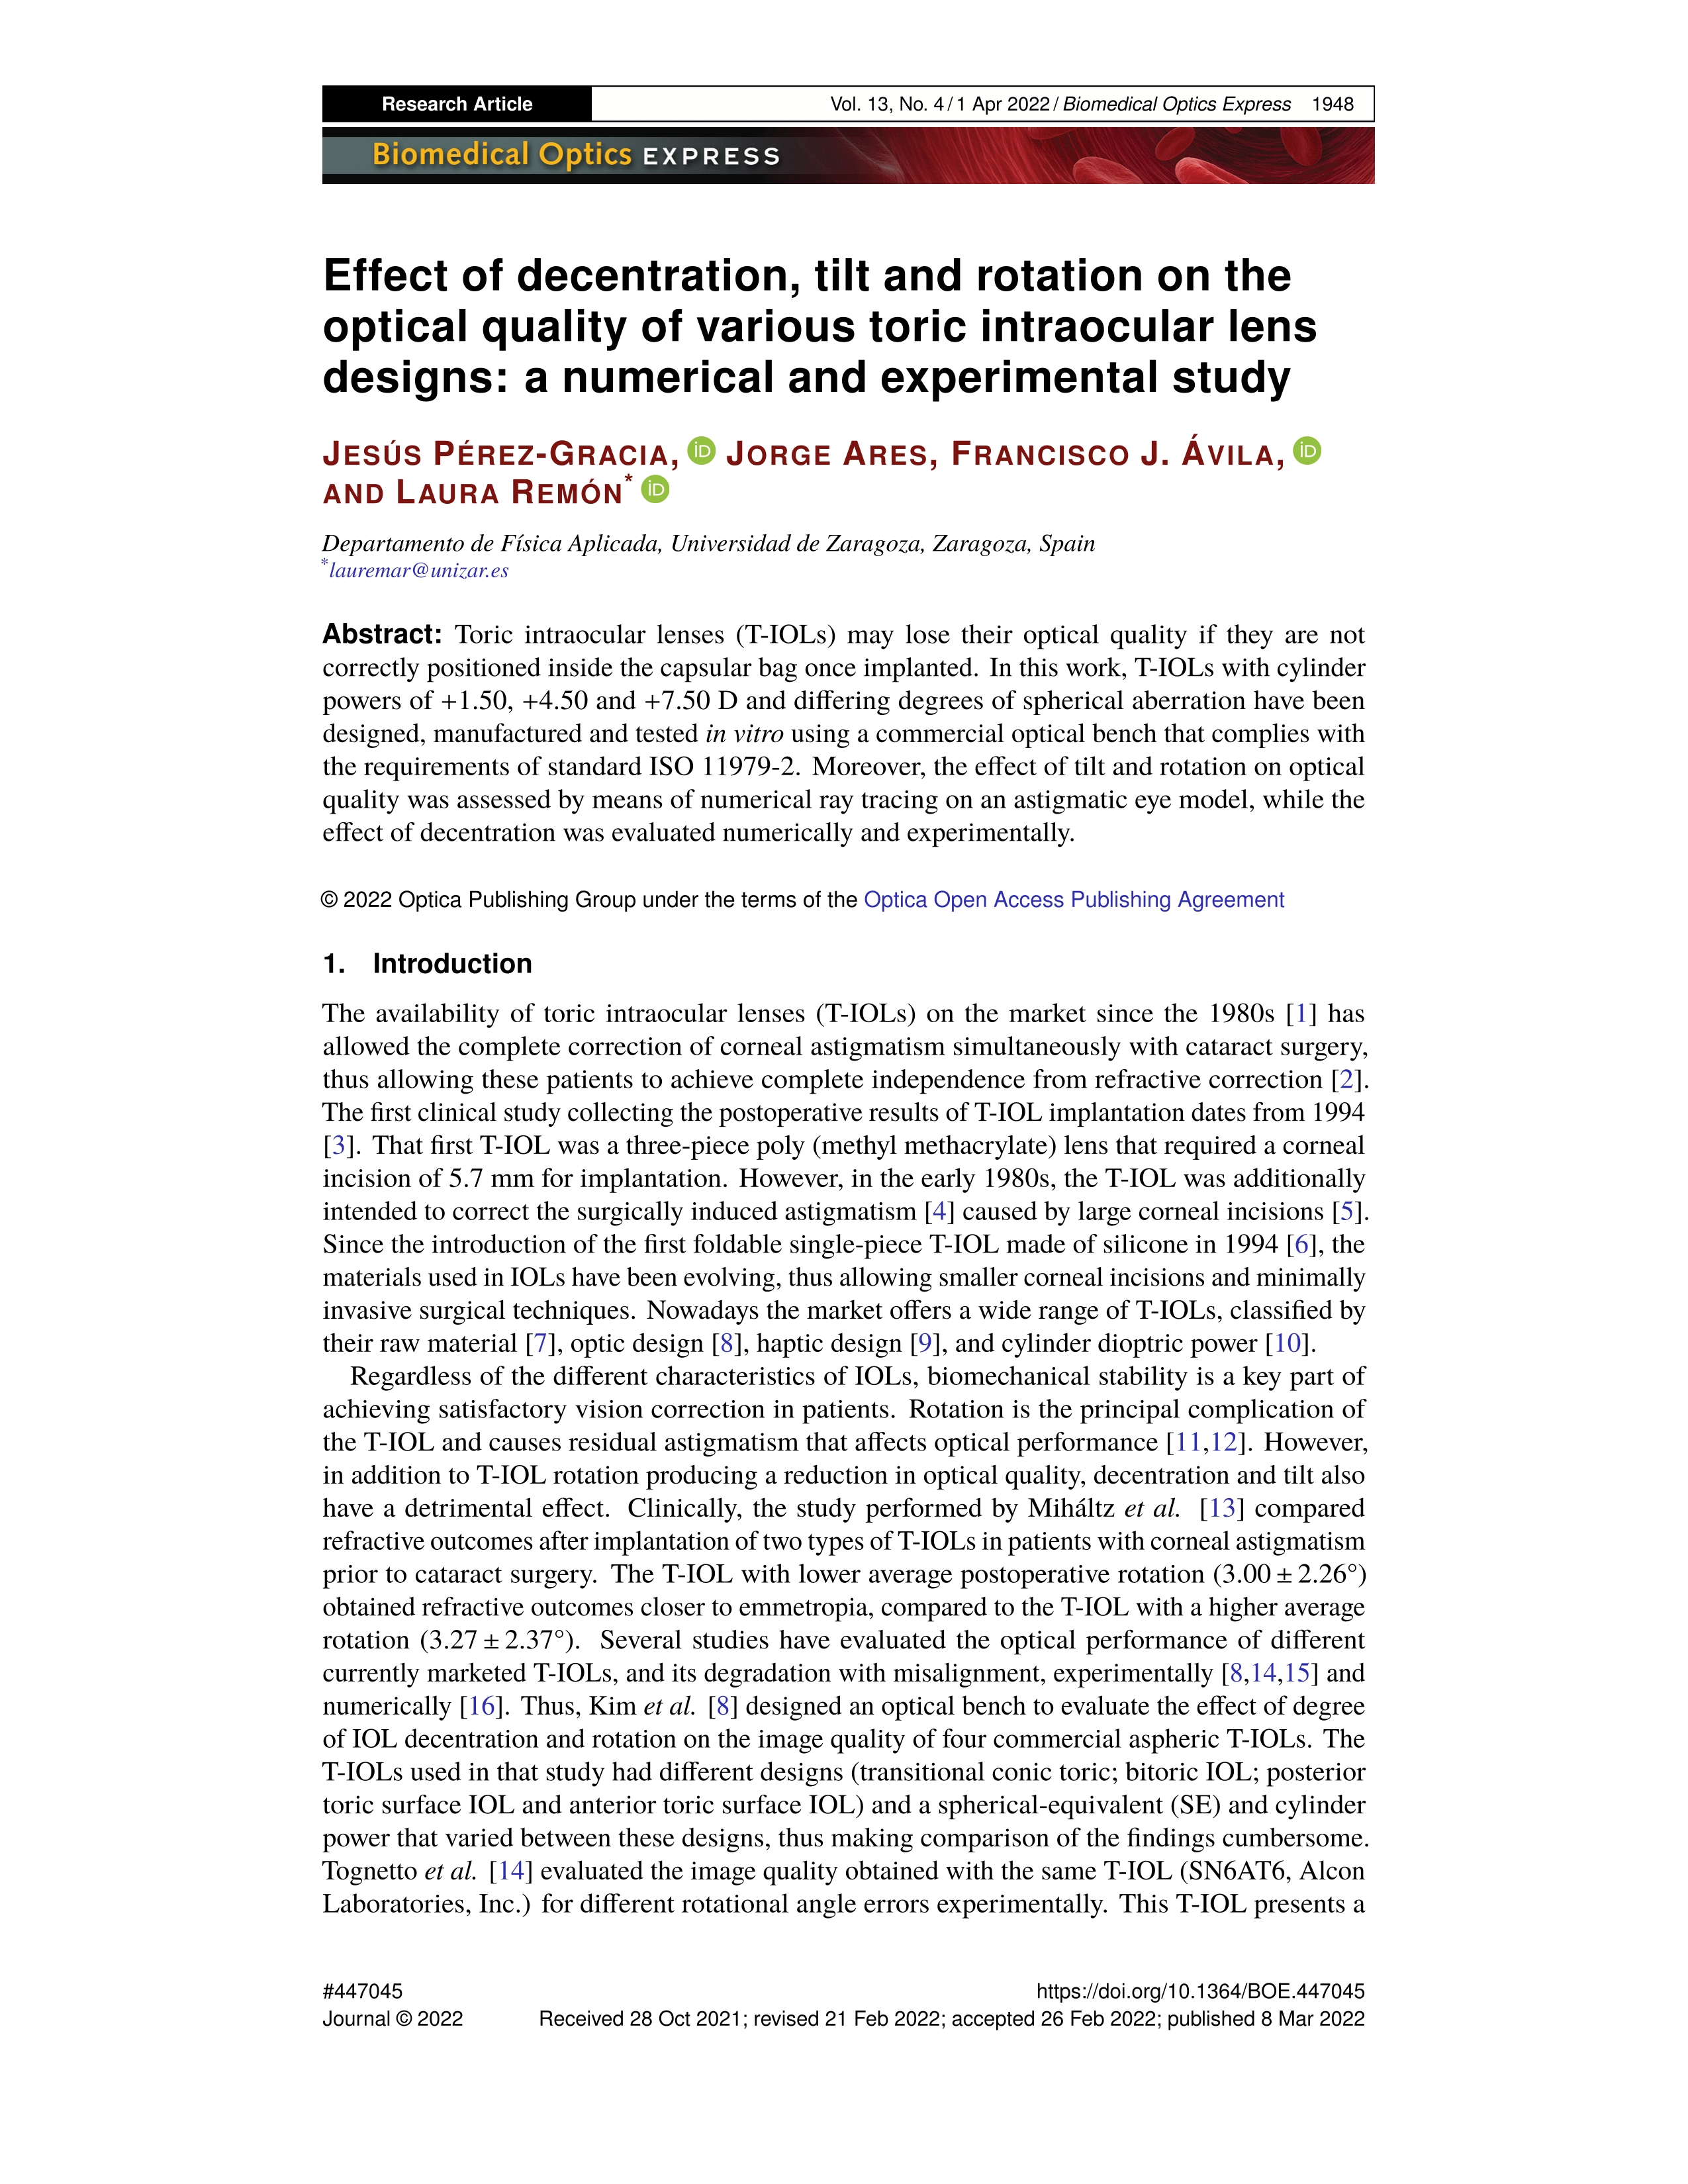 Effect of decentration, tilt and rotation on the optical quality of various toric intraocular lens designs: a numerical and experimental study